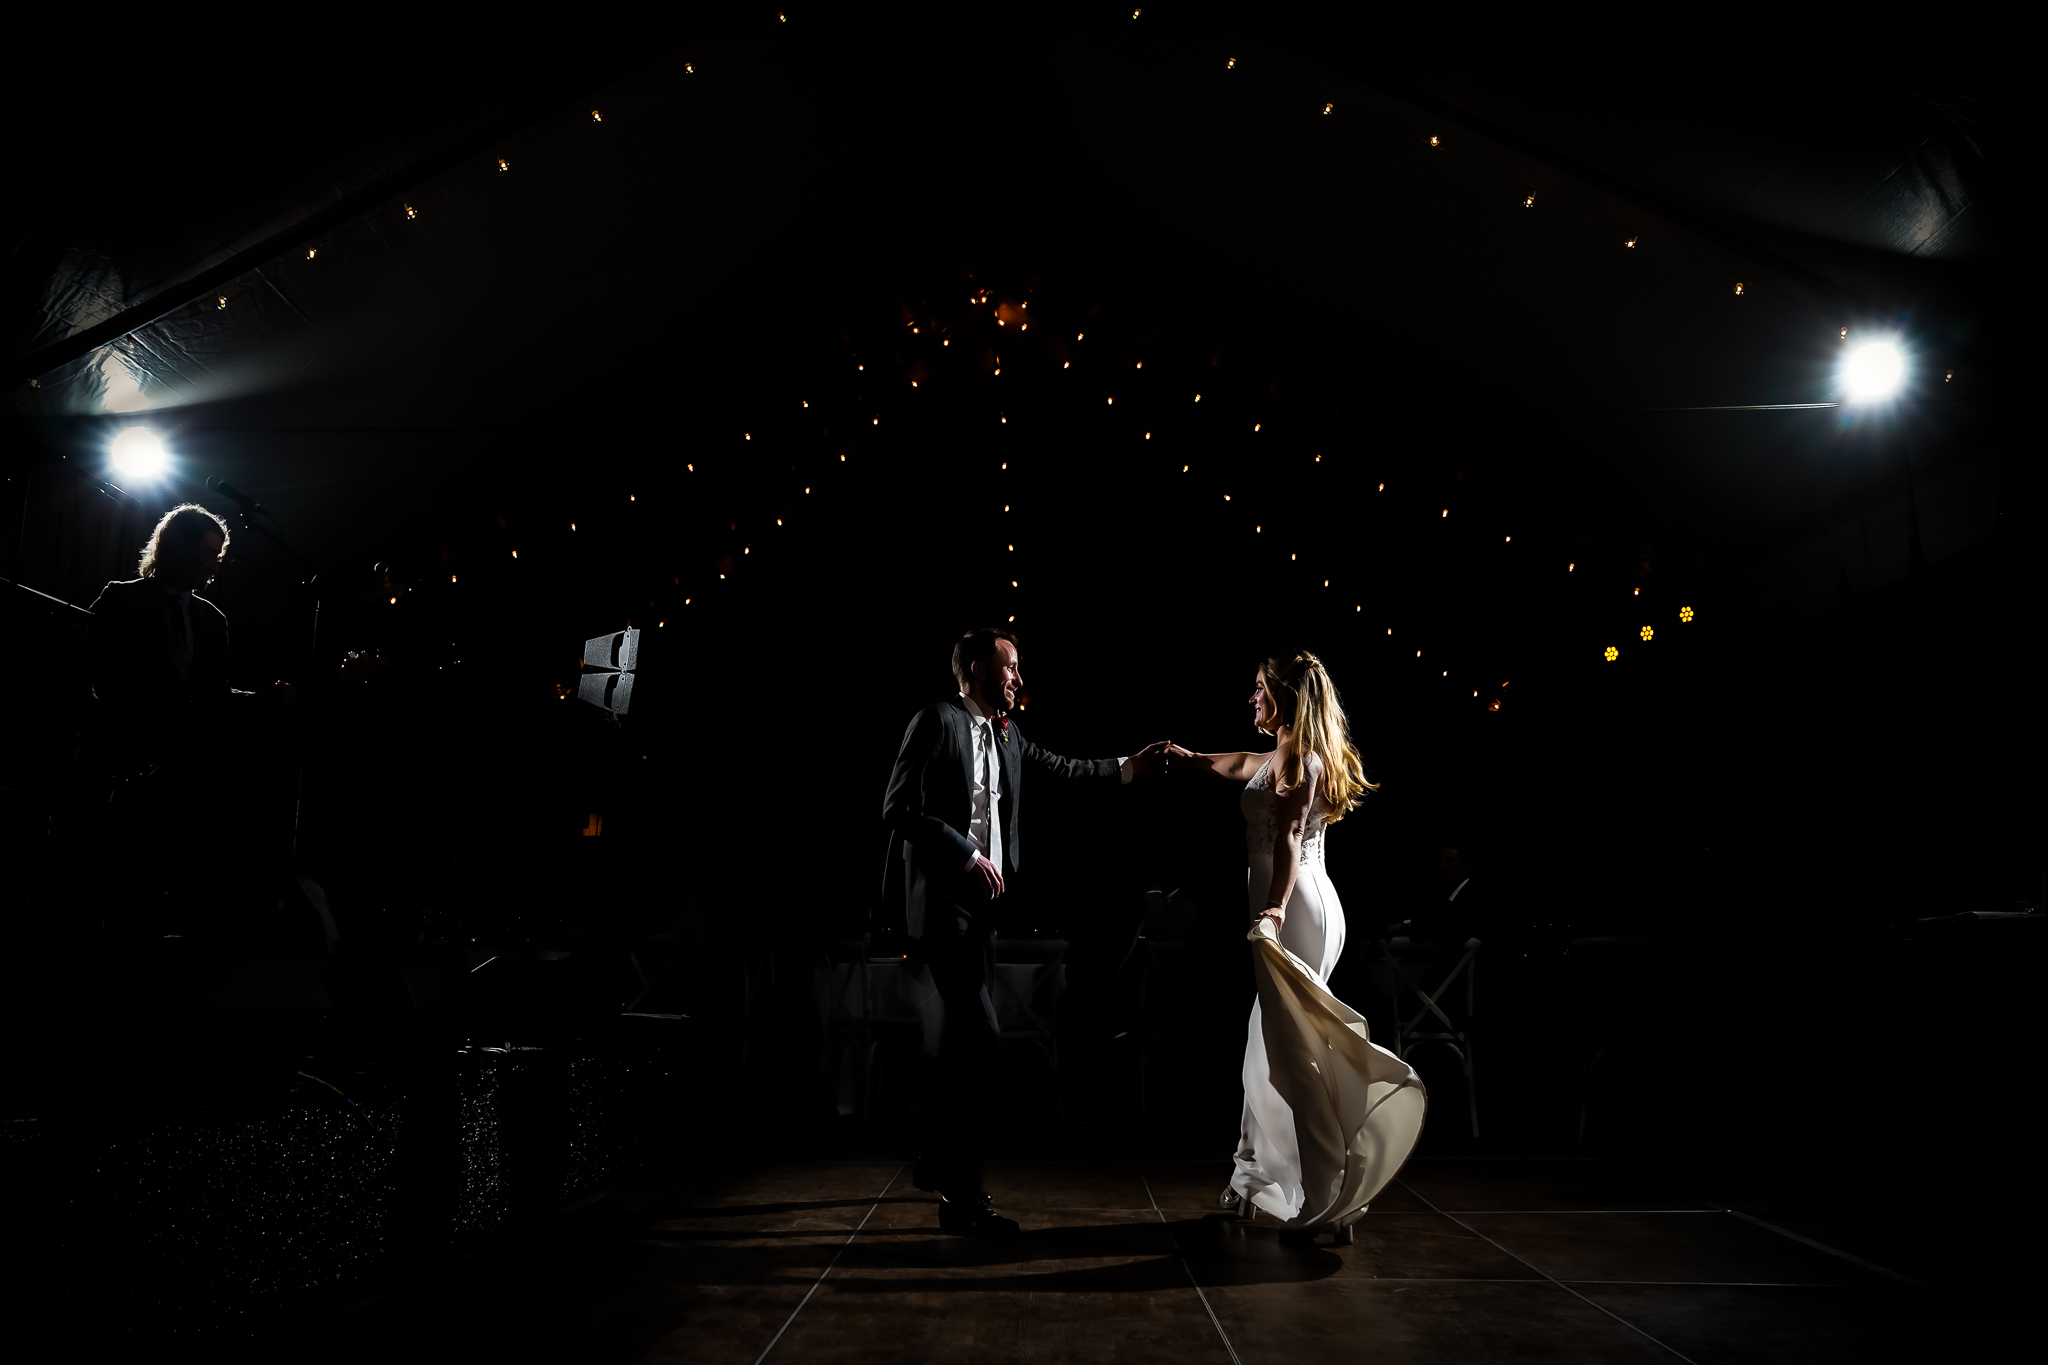 ThomasKim_photography A professional wedding photographer capturing a bride and groom dancing under a tent in the dark.